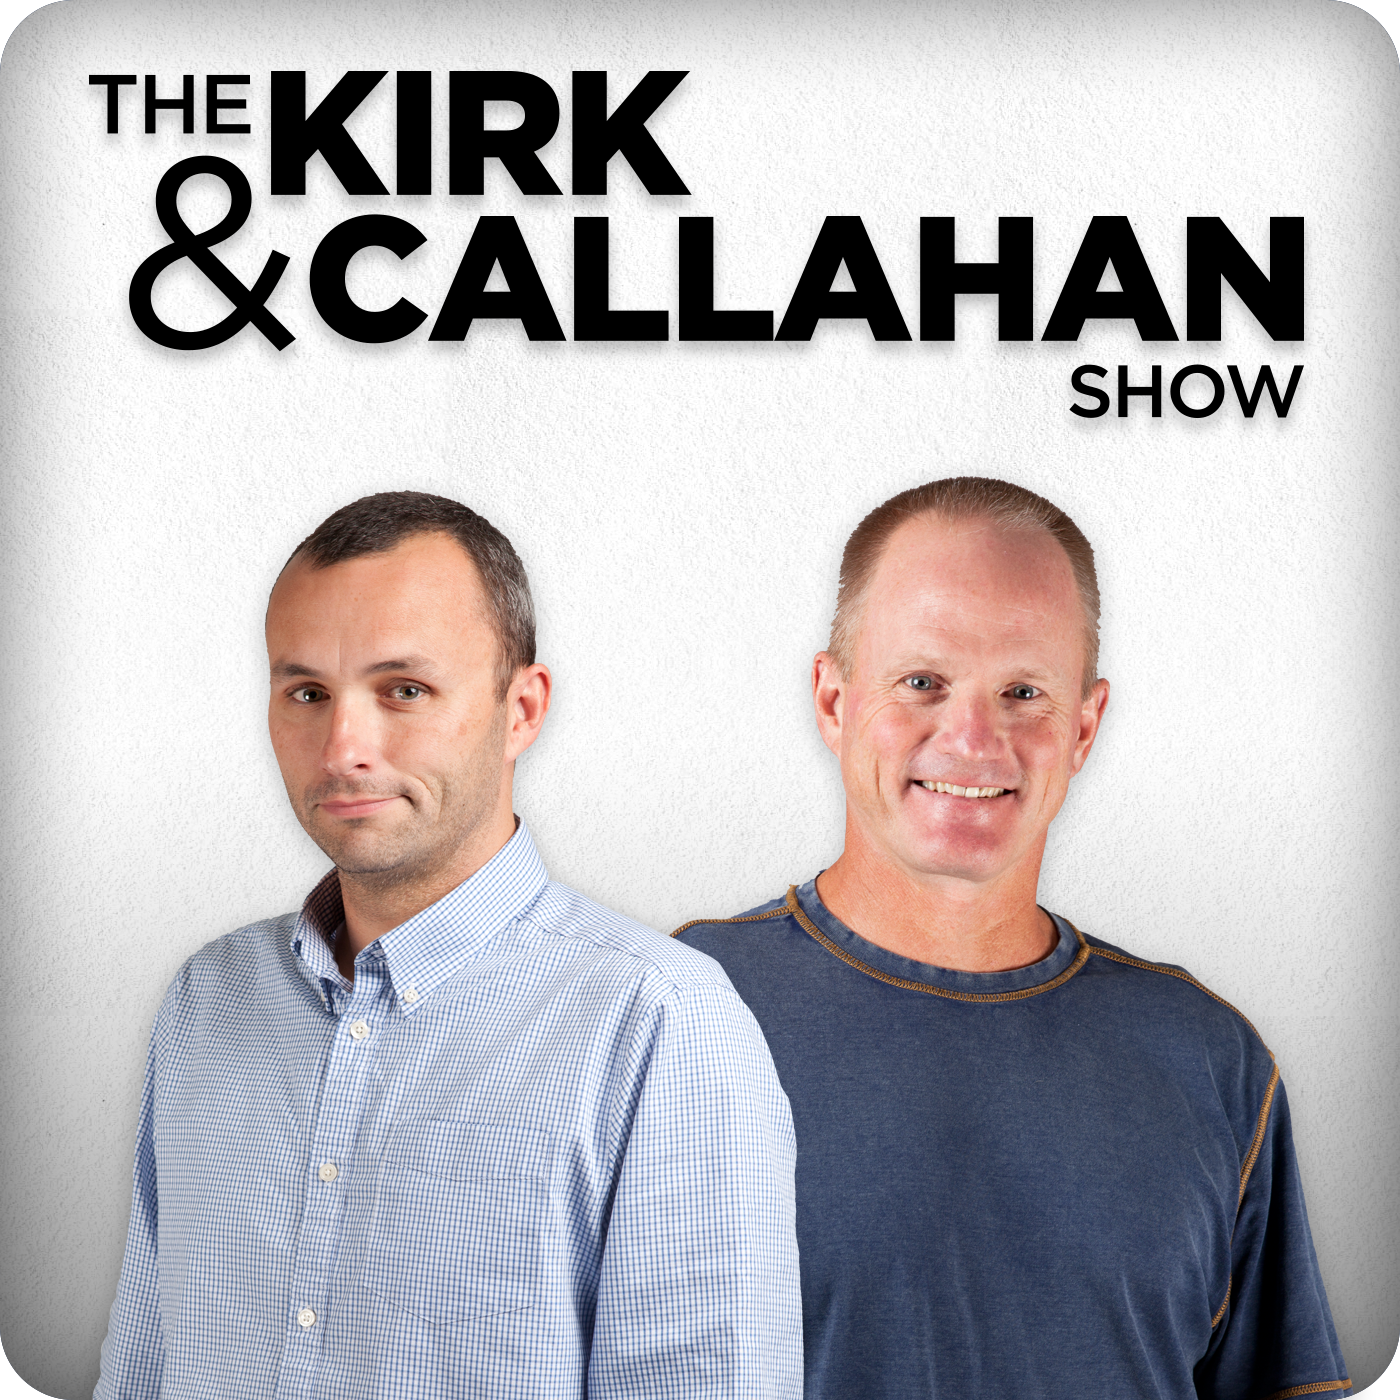 K&C - Adam Kurkjian defends his bombshell report of Brady threatening retirement; Mut had another brutal day at the race book 6-11-18